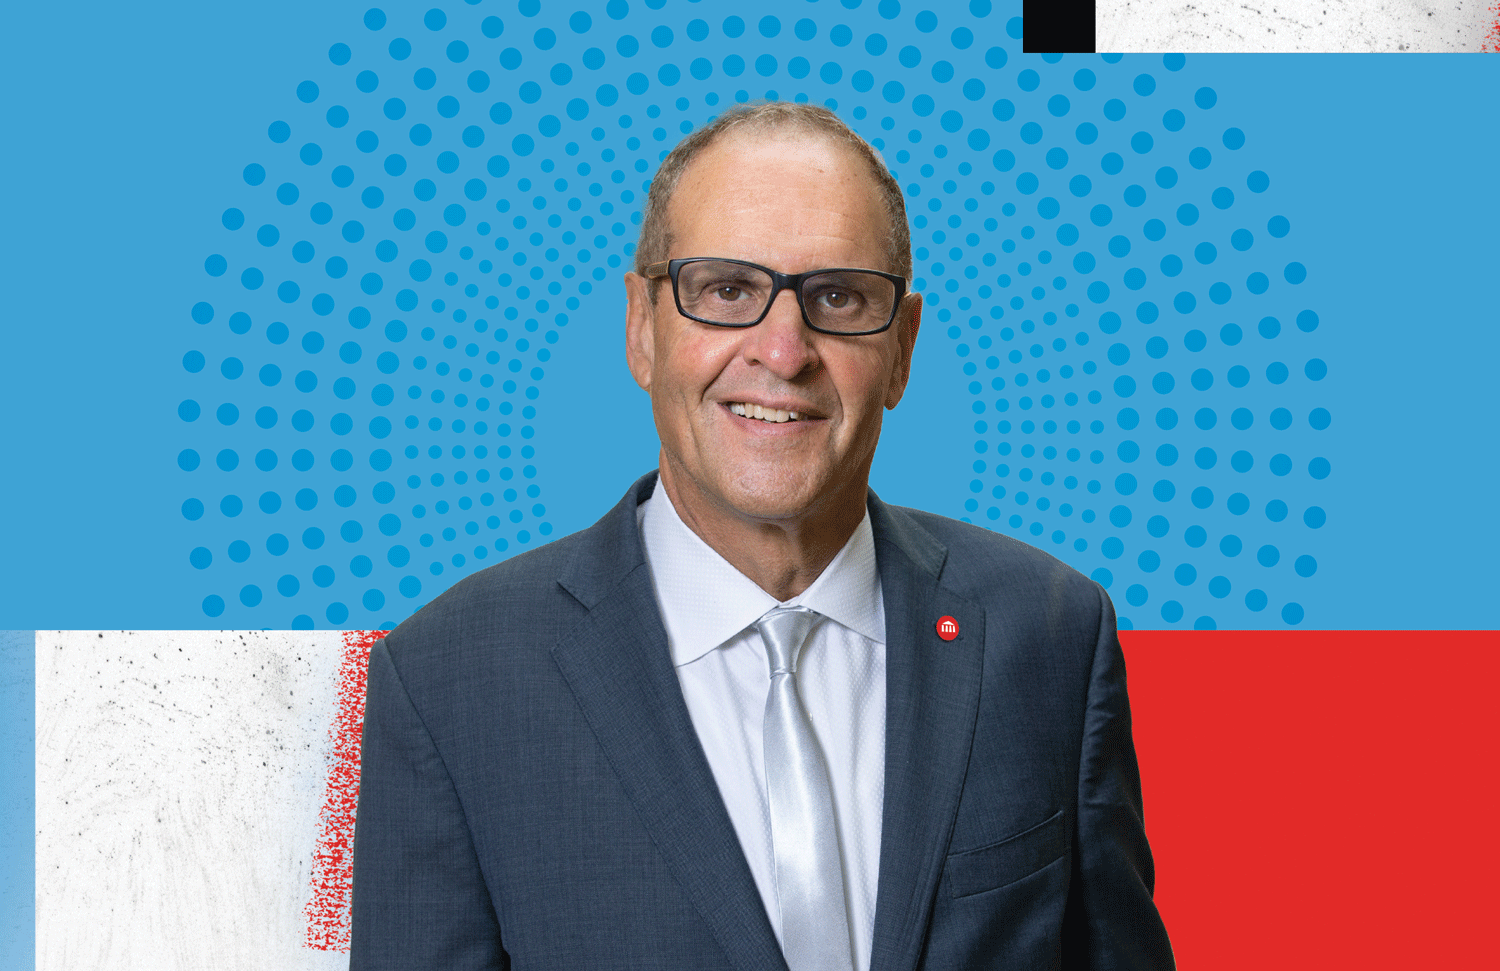 A portrait of UArts President and CEO, David Yager. He is wearing a silver tie, a dark blue suit jacket and has a red UArts logo pinned to his lapel. He is smiling slightly and has gray glasses. Behind him, a graphical collage of painterly red, white and blue color fields with blue dots emanating from the center.